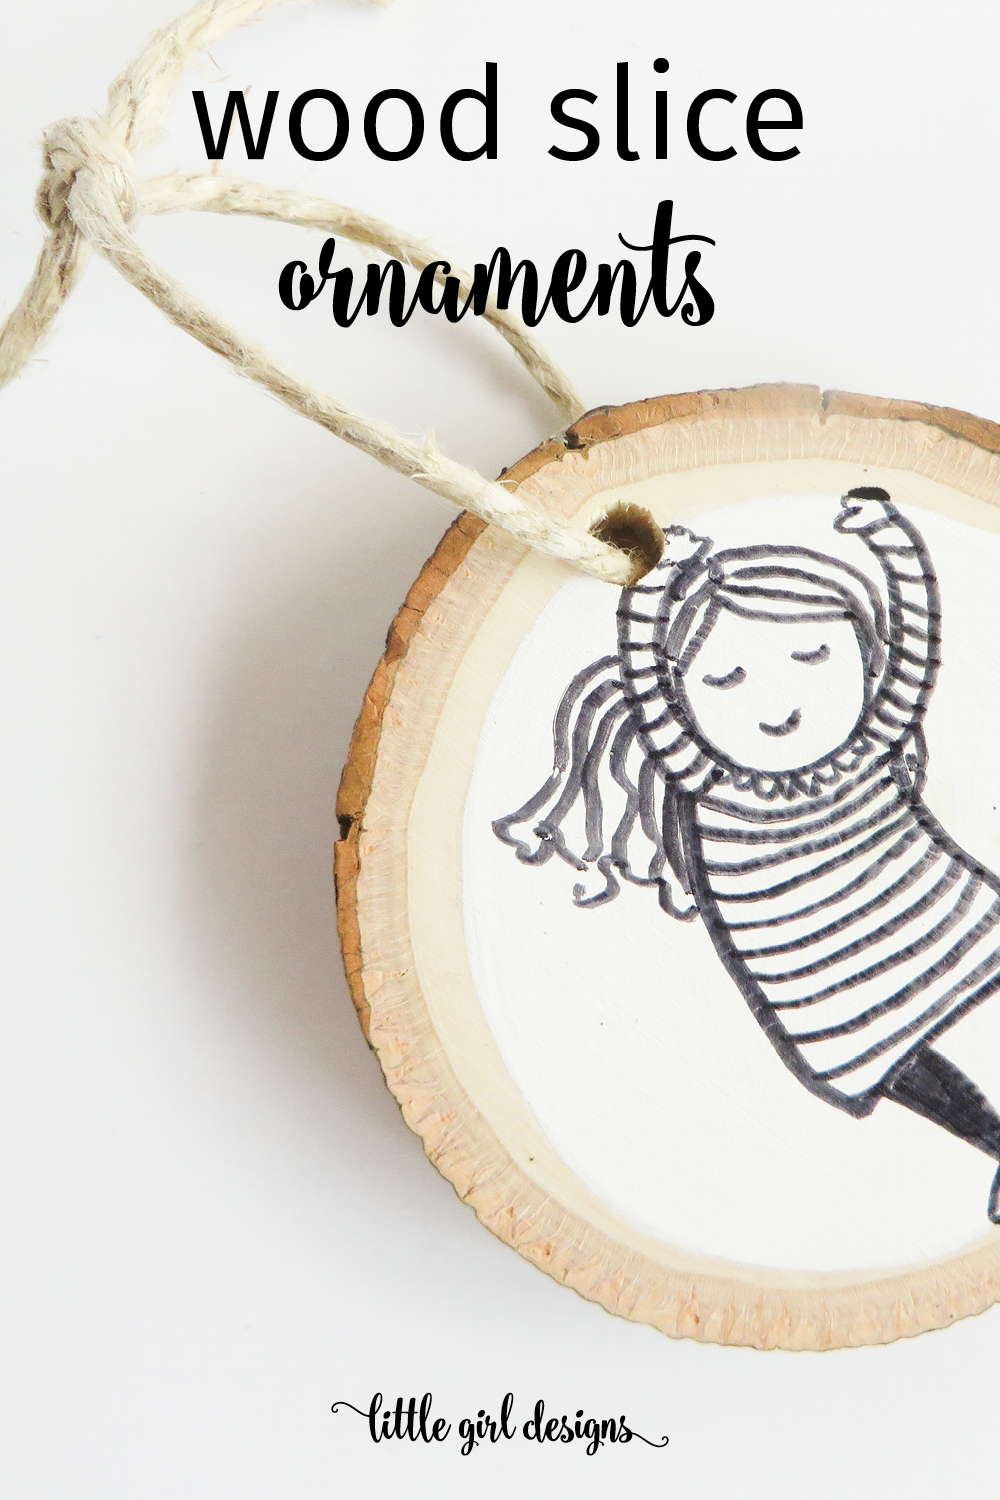 Wood slice ornaments are so easy to make and decorate! They make a great teacher's gift for Christmas and are also a great mini-gift for friends. Make up a batch to give to neighbors or use them as fancy gift tags. :)